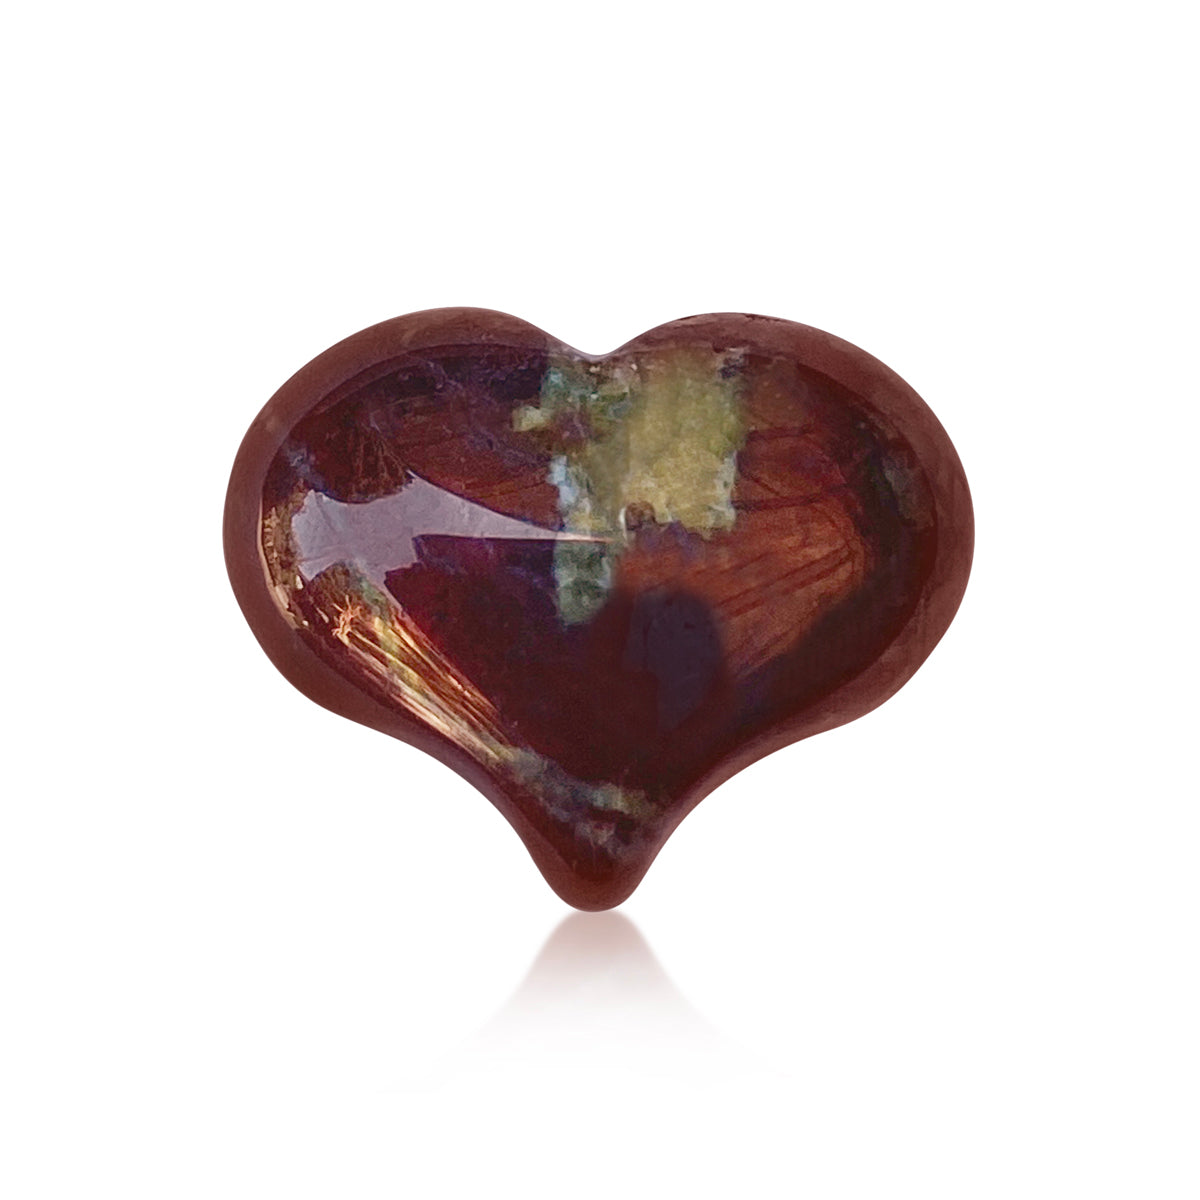 Unique and genuine Dragon Blood Heart Shaped Healing Gemstone for Enhancing Life Force